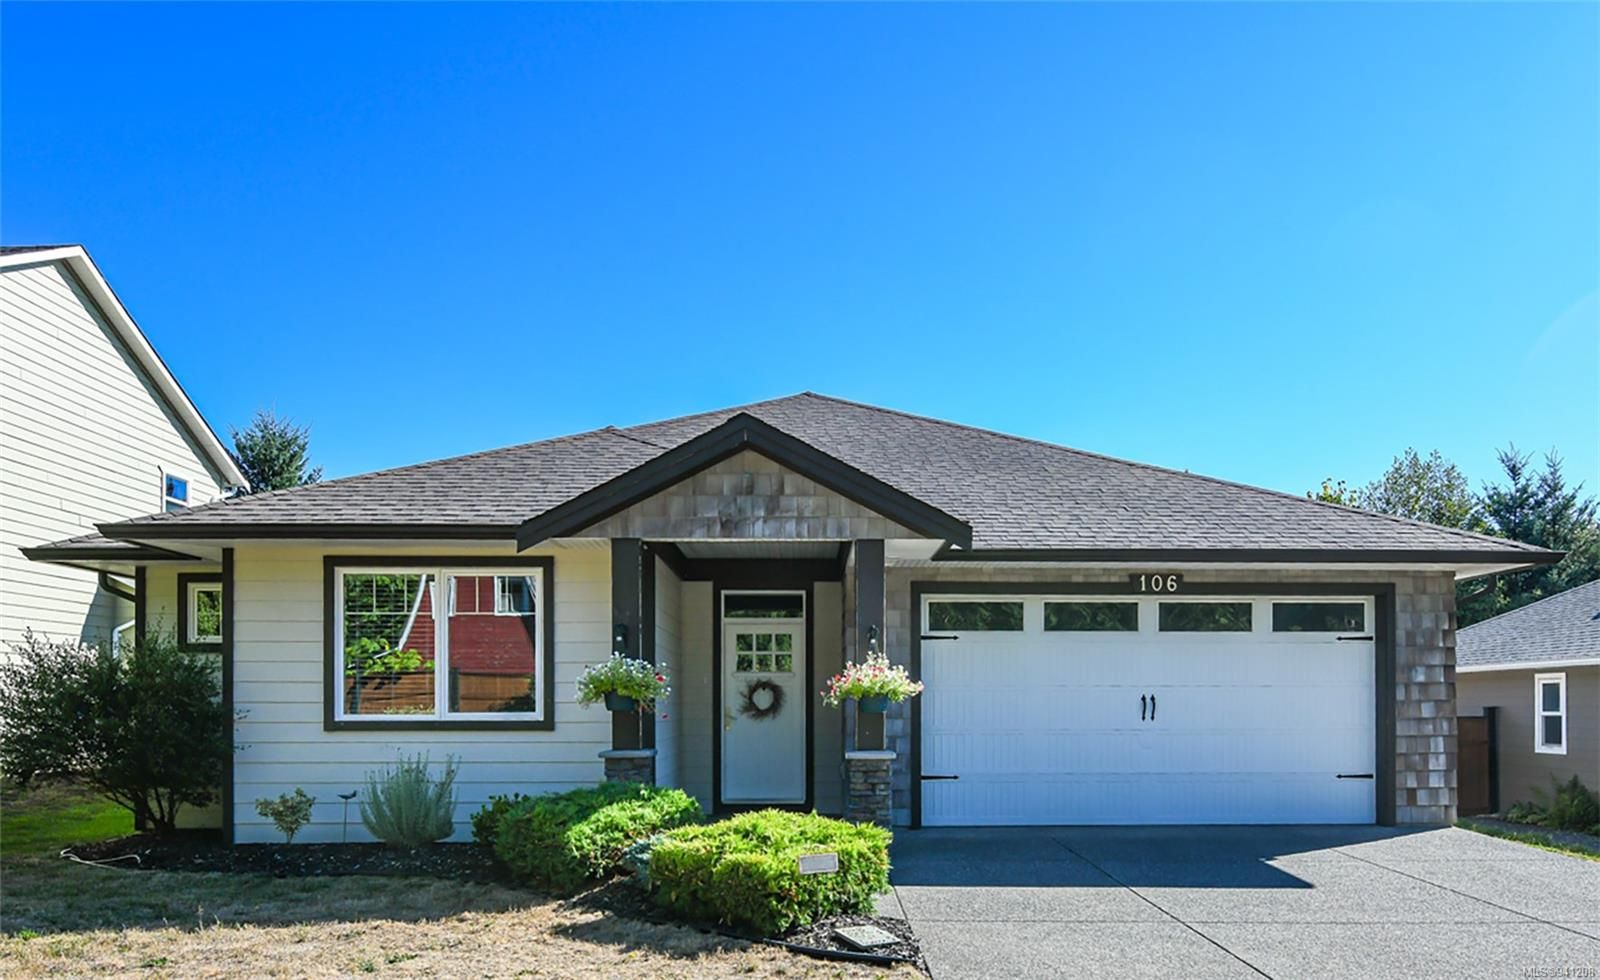 New property listed in CV Courtenay East, Comox Valley